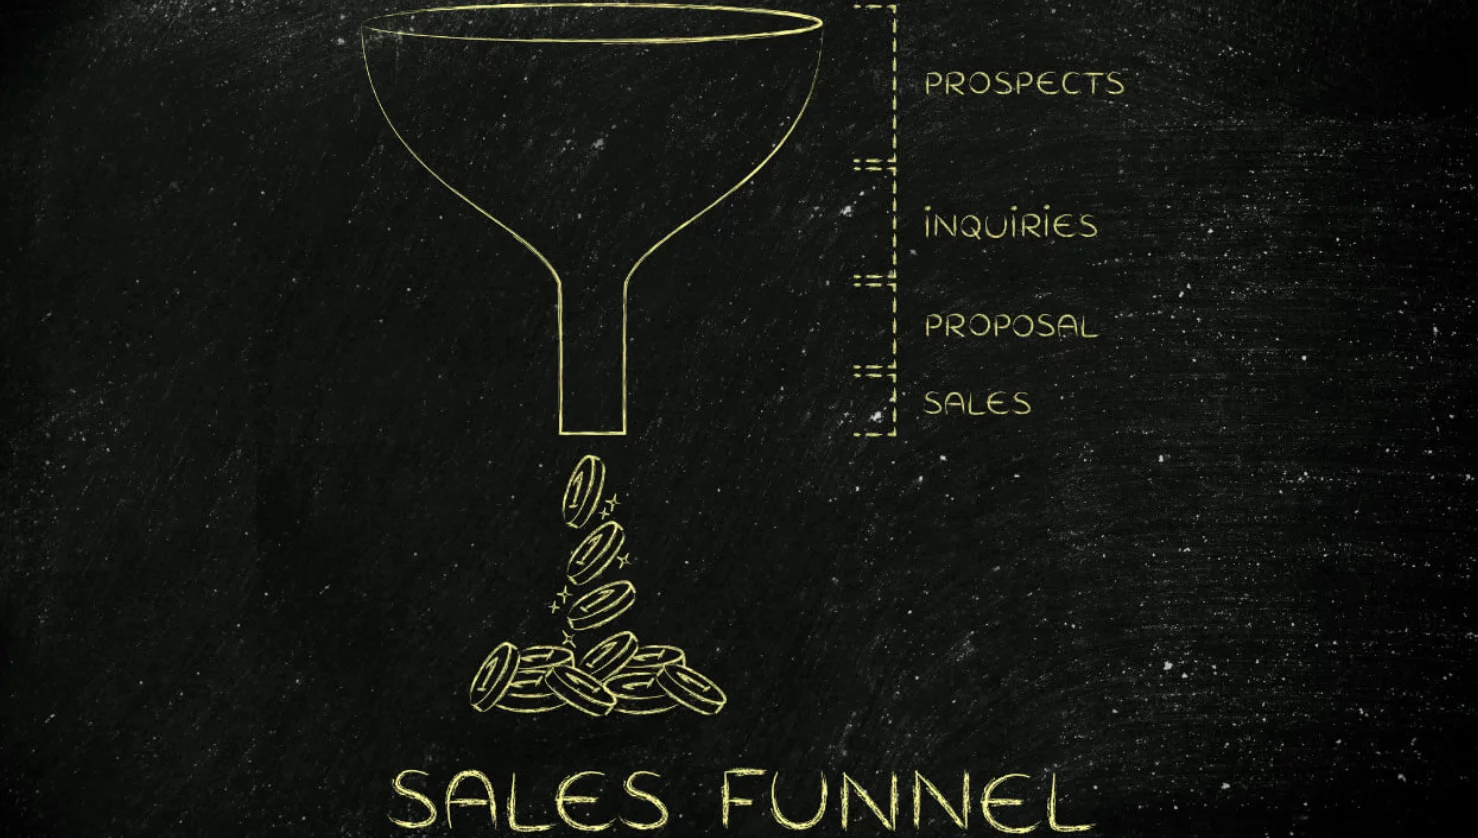 Reaons for Sales Funnel